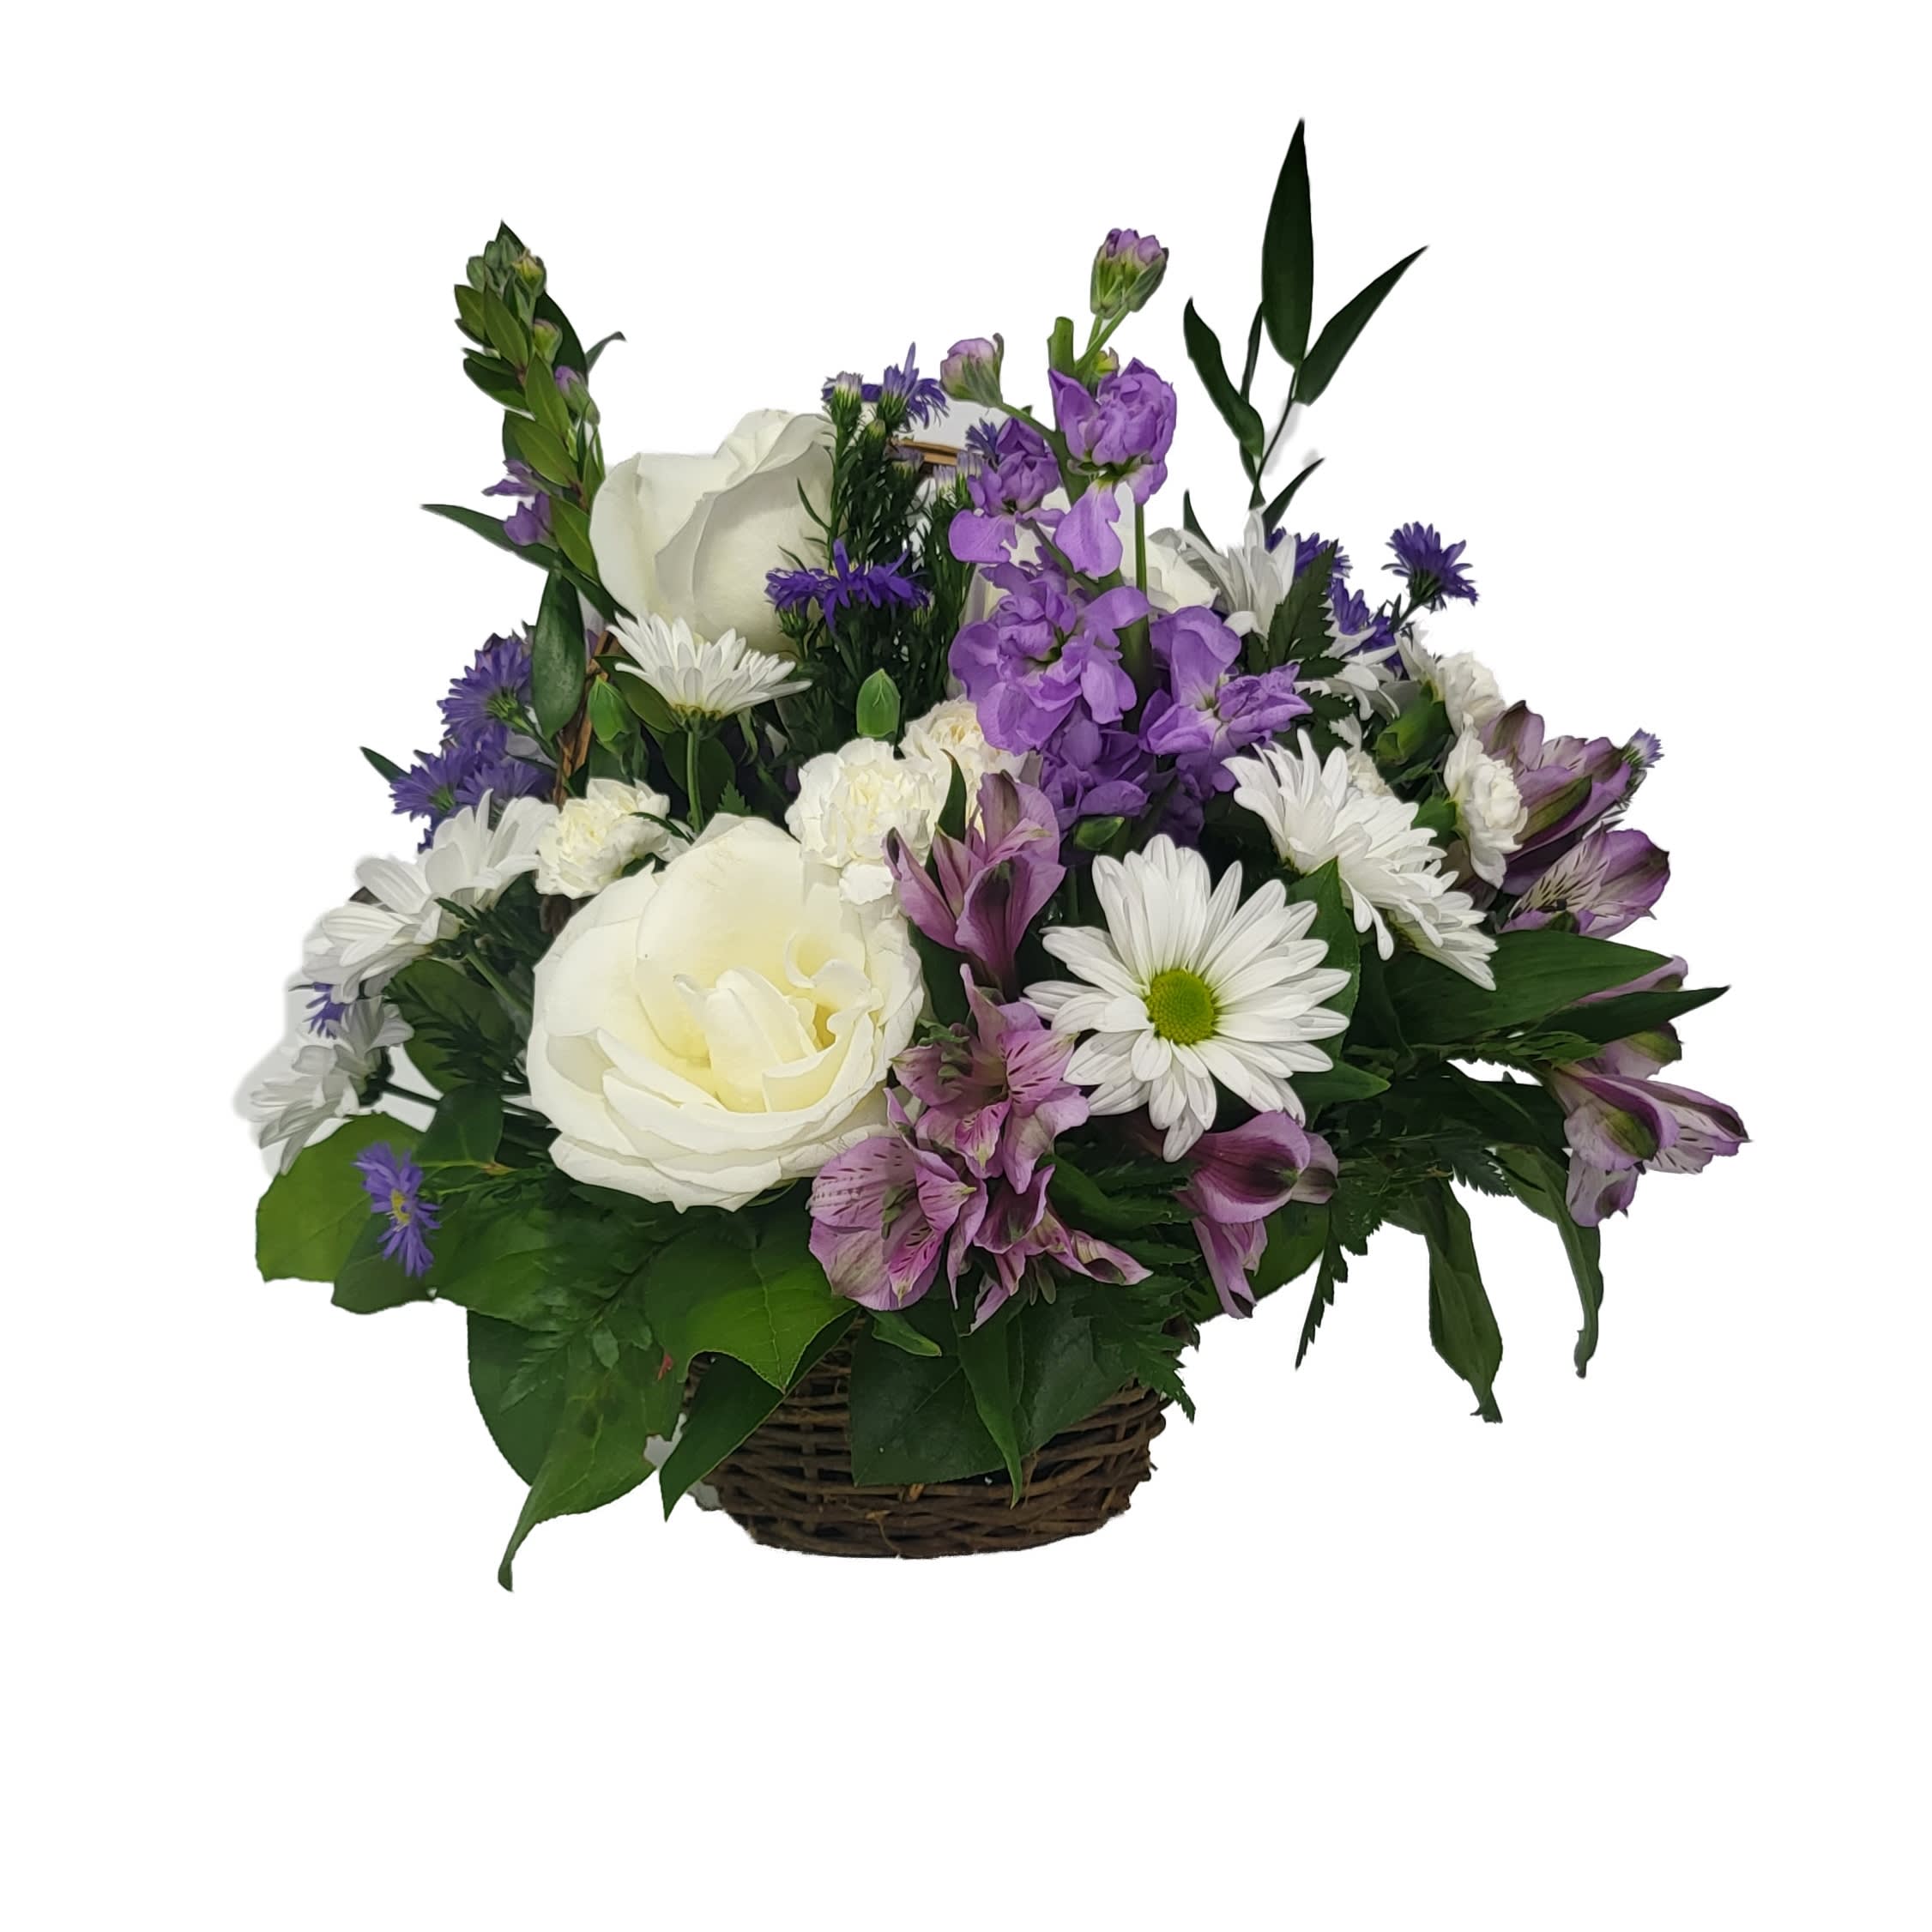 Simply Said - This simple wicker basket of white roses, alstroemeria, delphinium, and daisies complemented with just the right amount of greens and purple accents is perfect for any occasion!  If purple is not your color call us for available colors